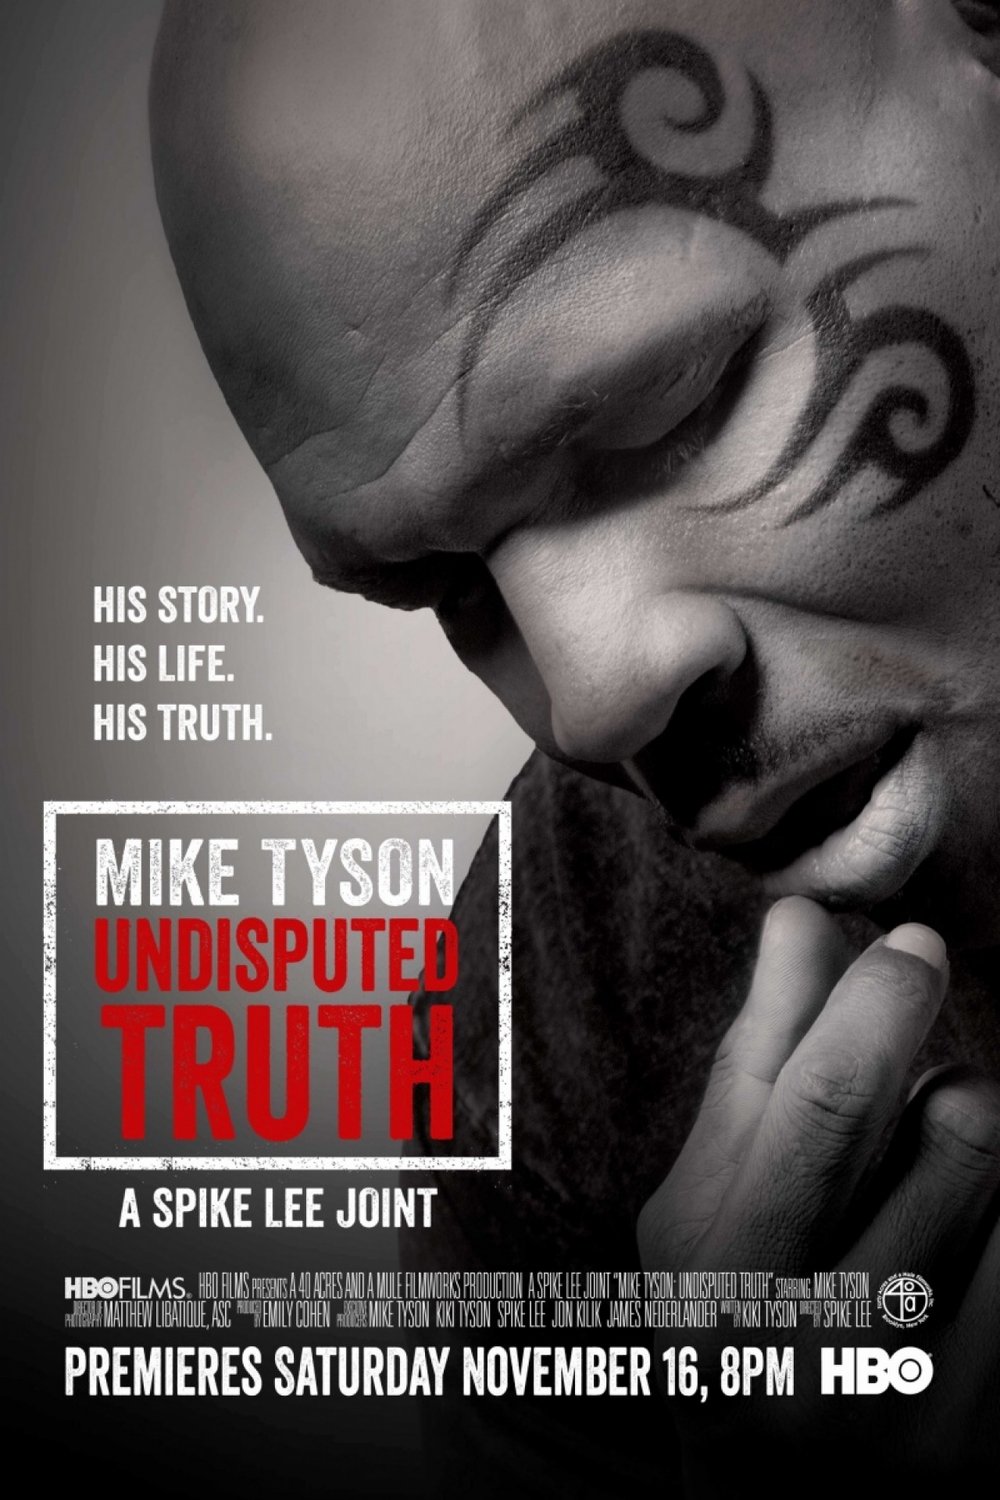 Poster of the movie Mike Tyson: Undisputed Truth